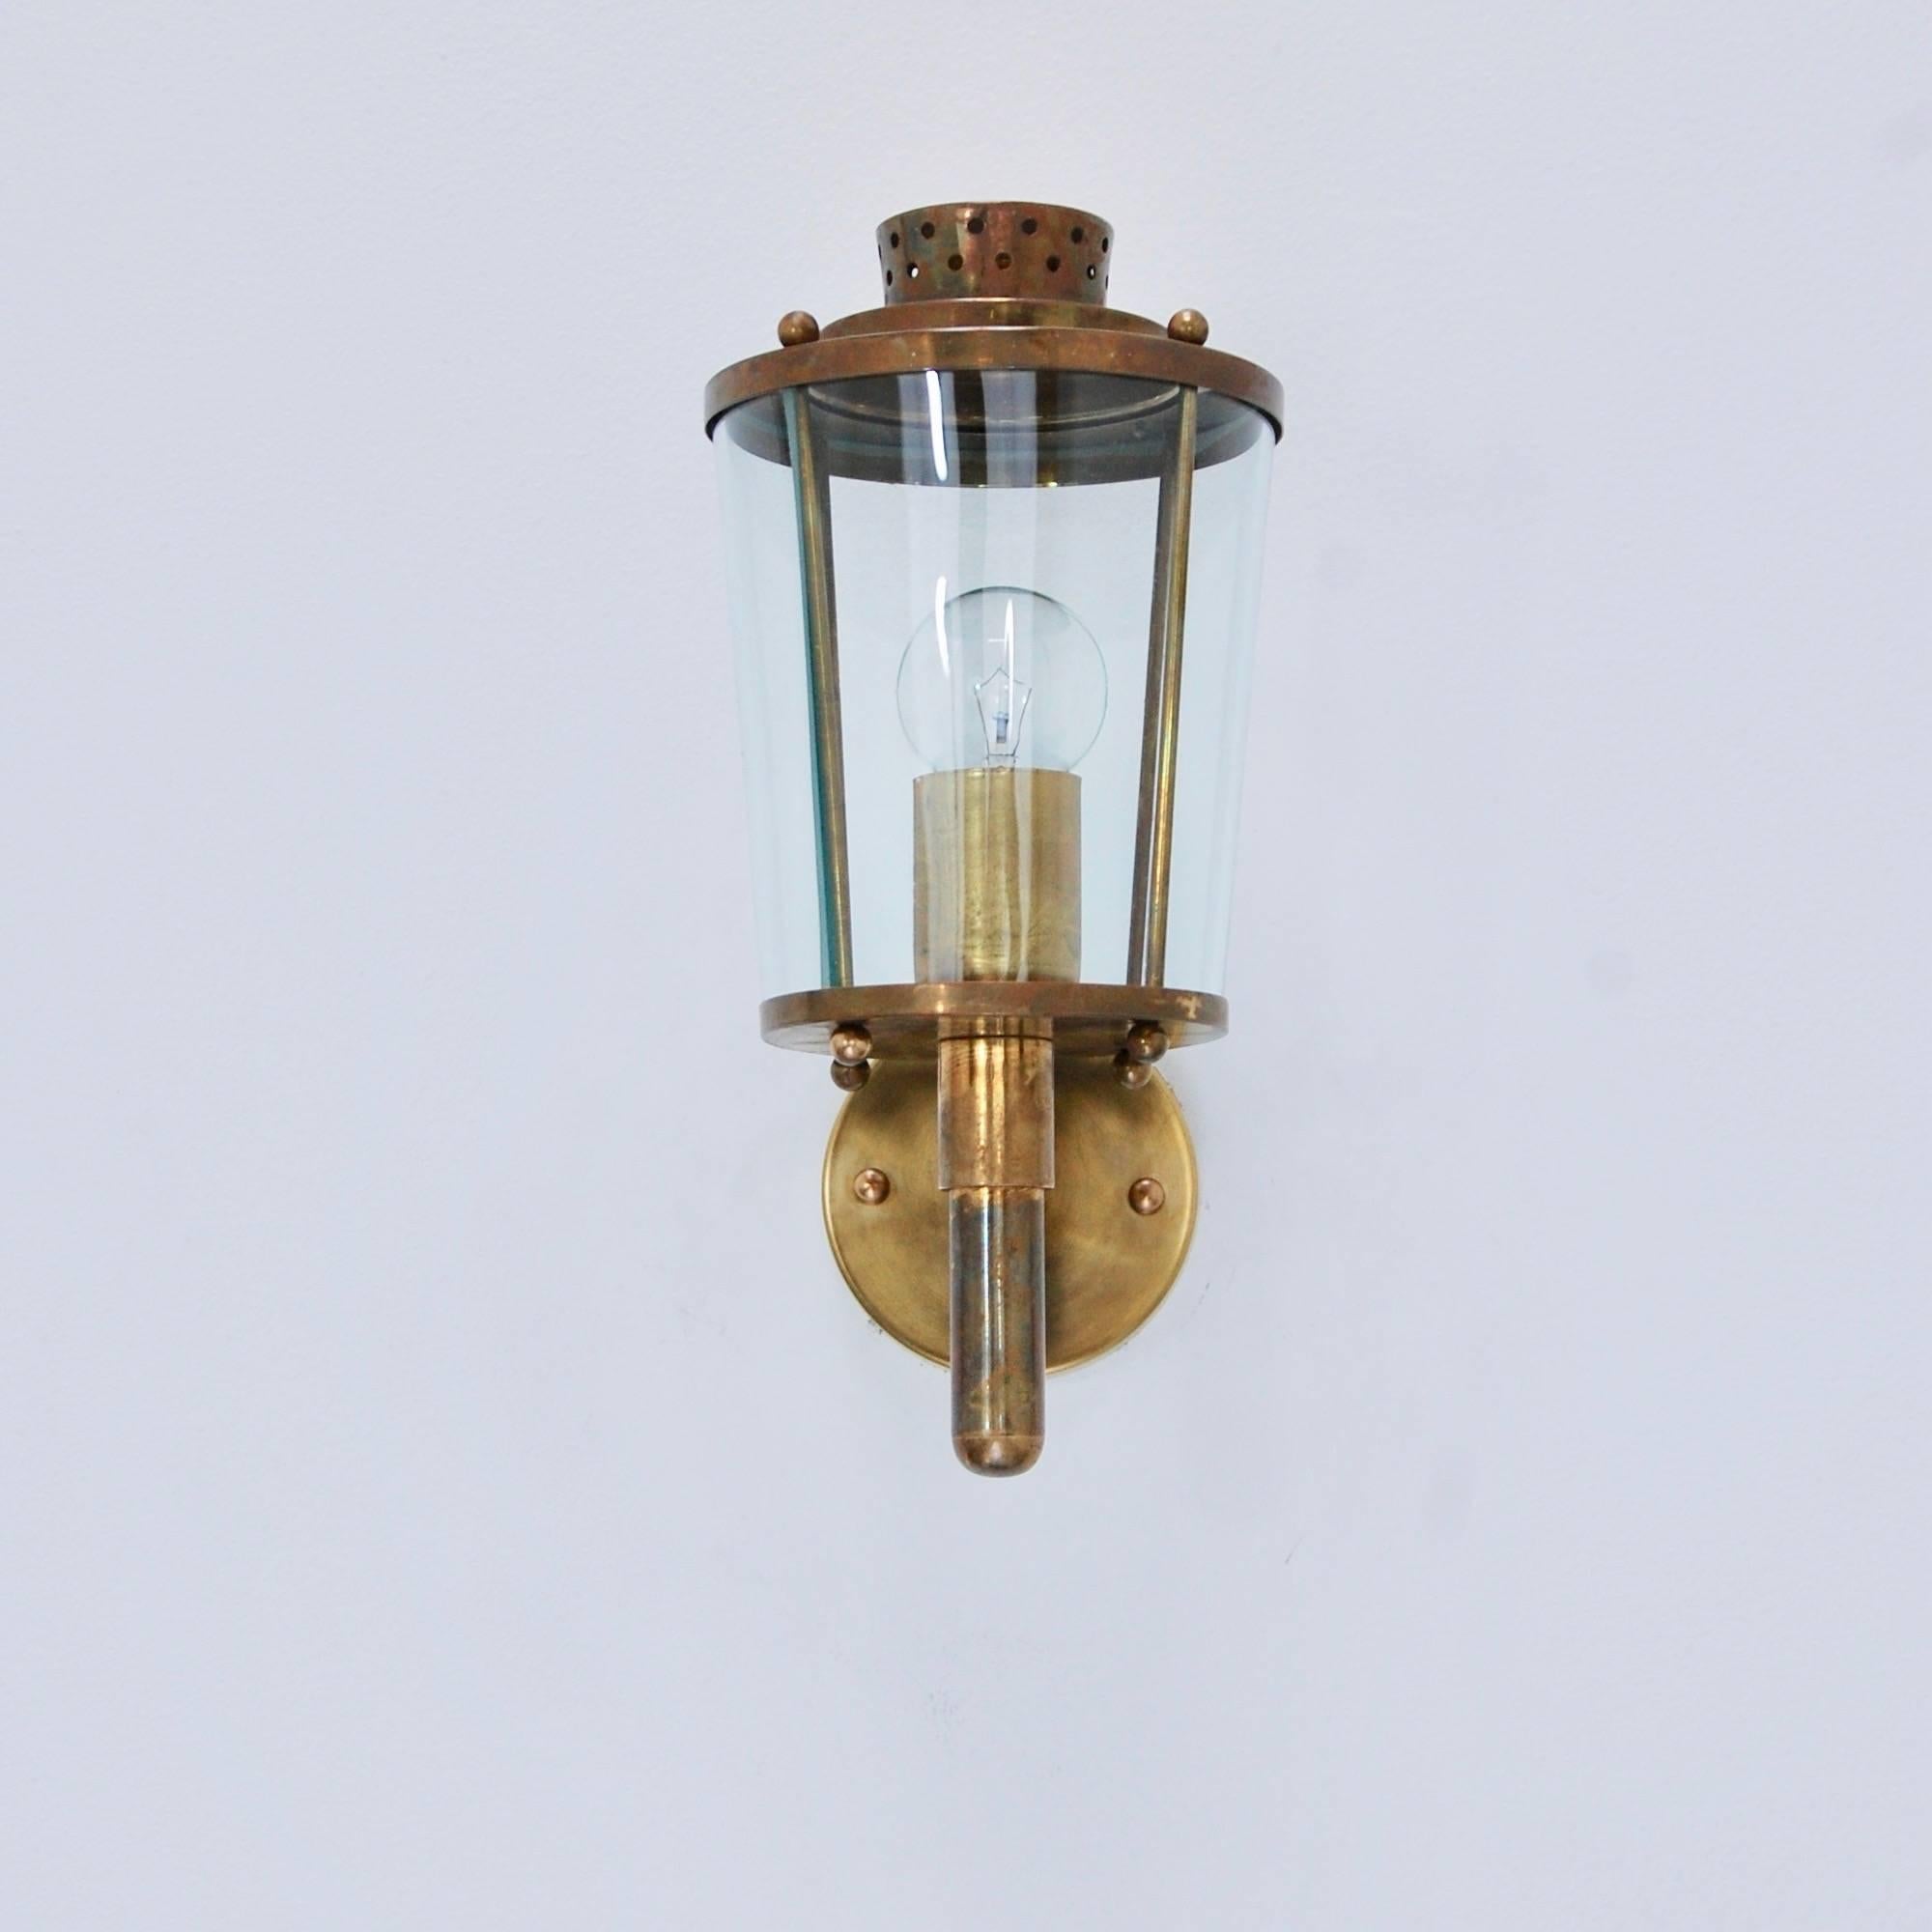 A pair of Italian indoor/outdoor wall lanterns from of the period 1950s Italy. Partially restored, patina lacquered brass finish with a single E12 based socket per glass cylinder shade. Maximum wattage 40-60 watts per socket. Back plate has 2 ¾”